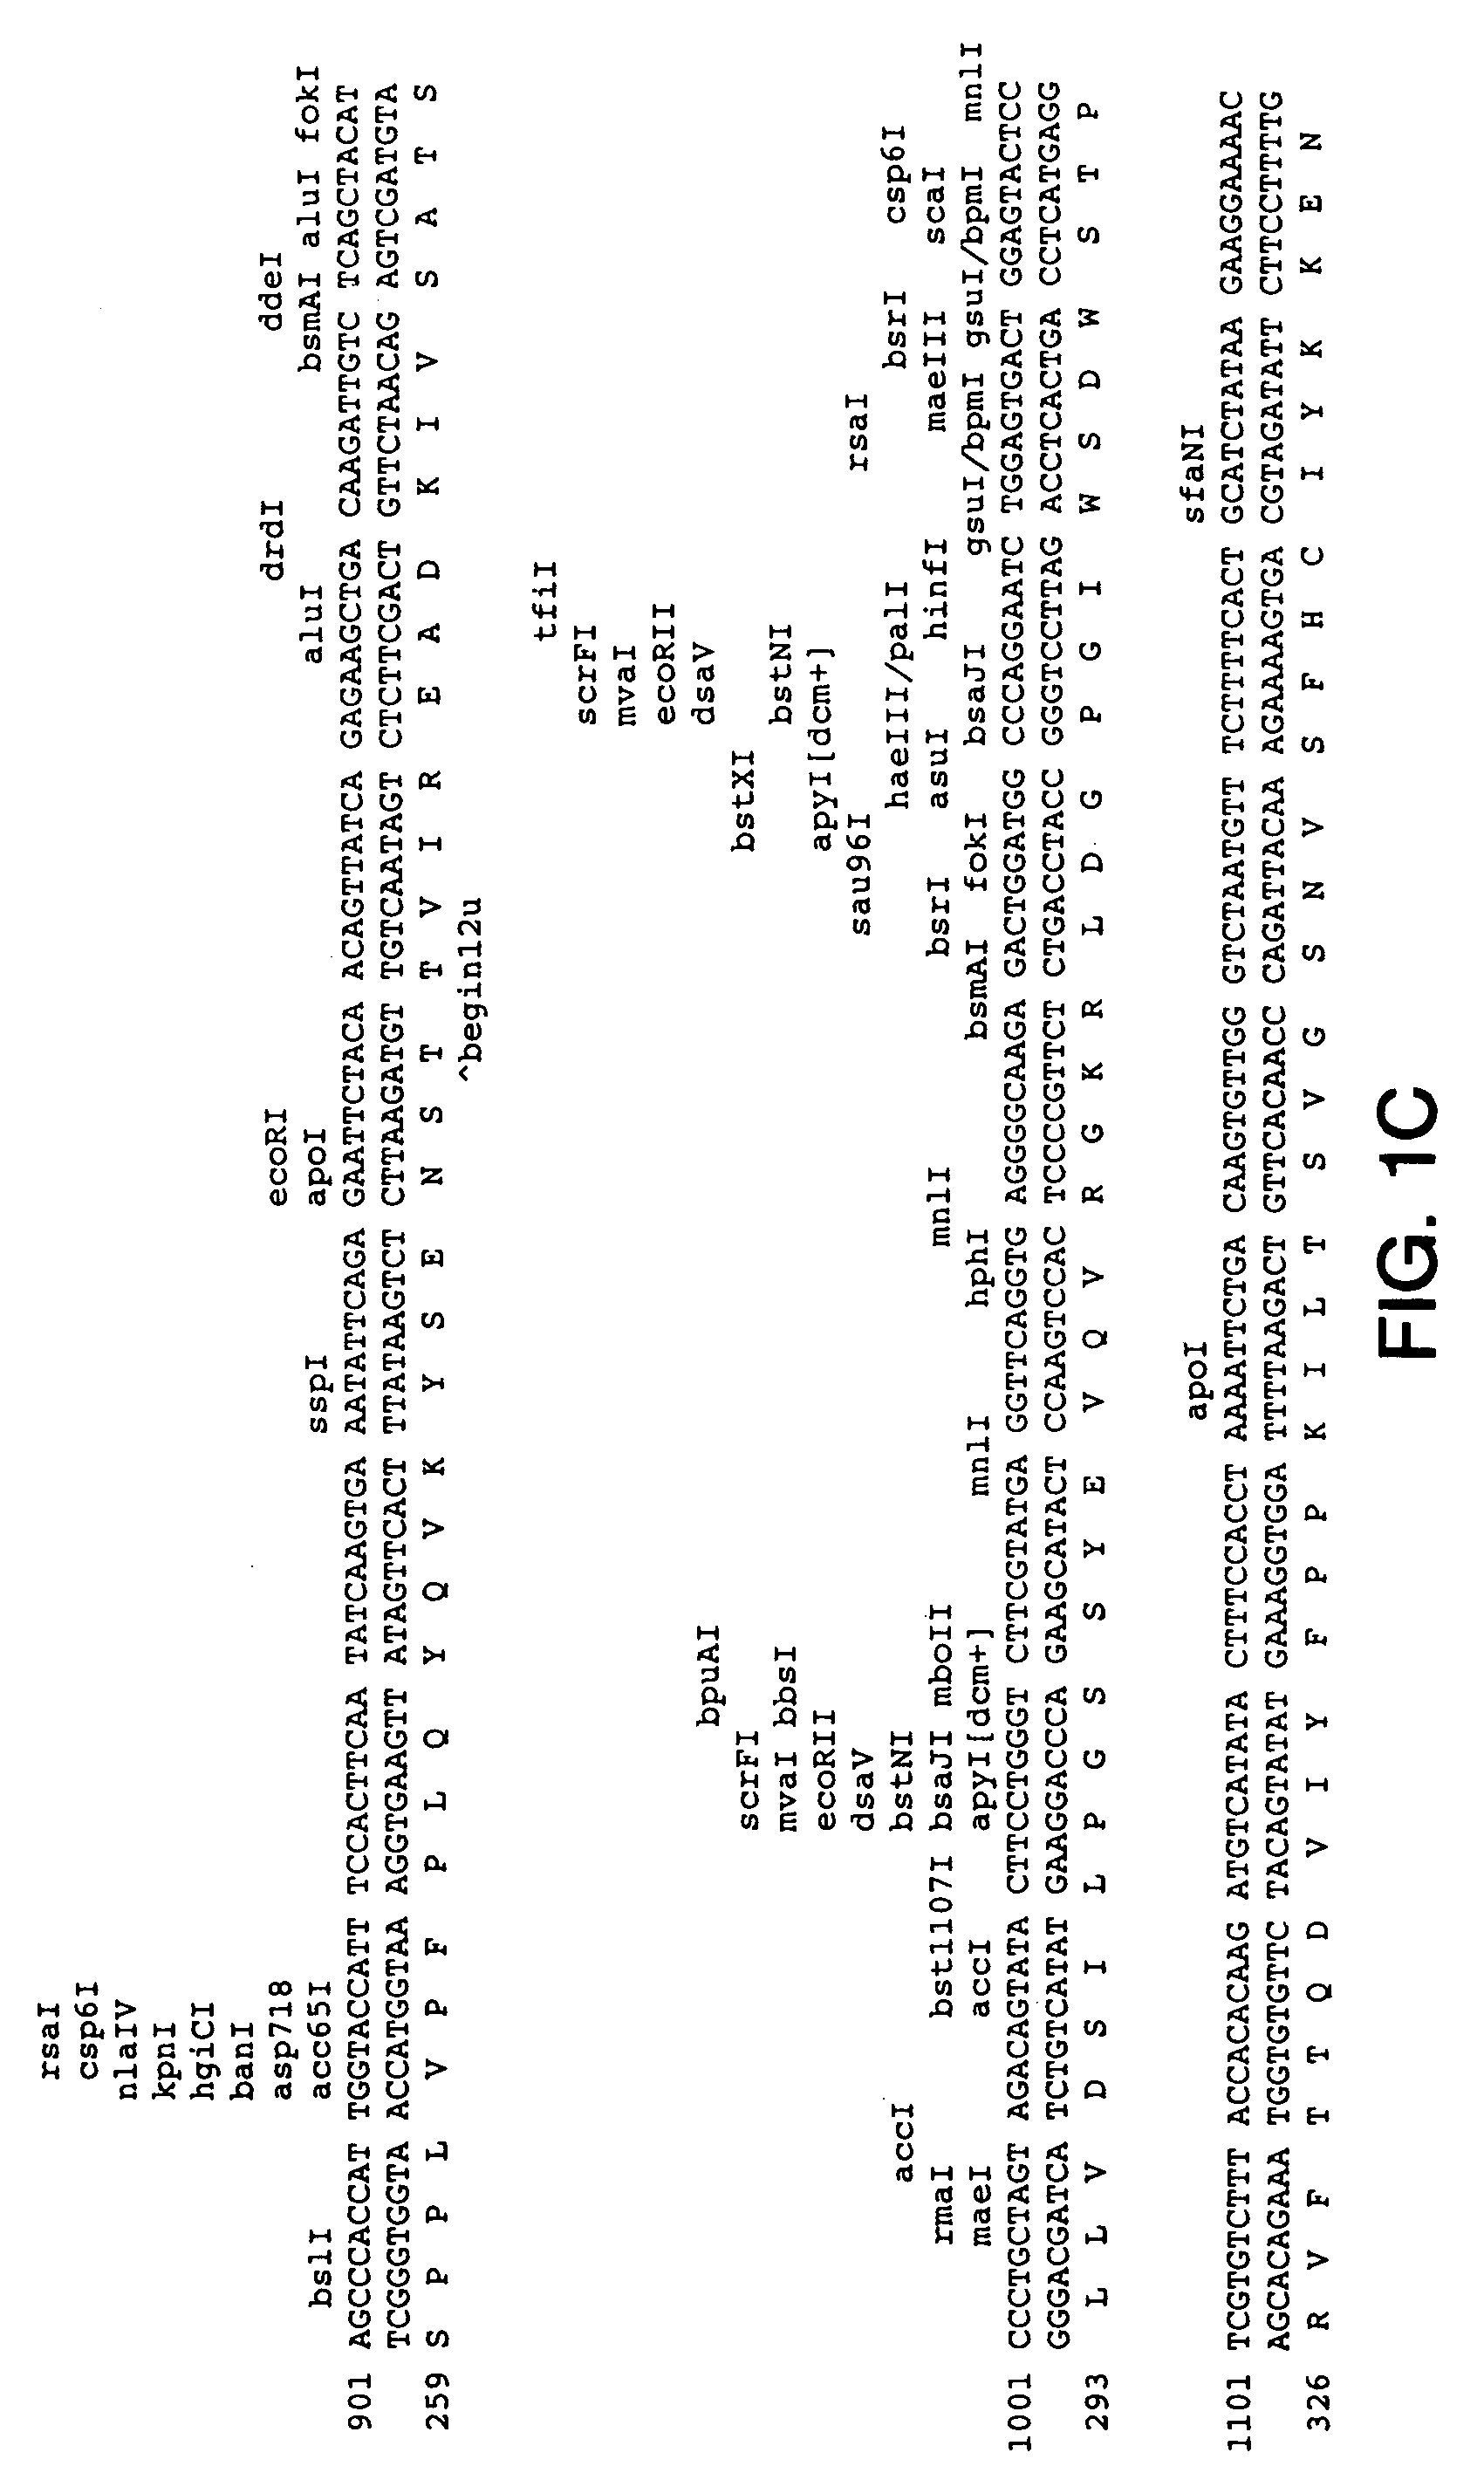 Method for enhancing proliferation or differentiation of a cell using ob protein